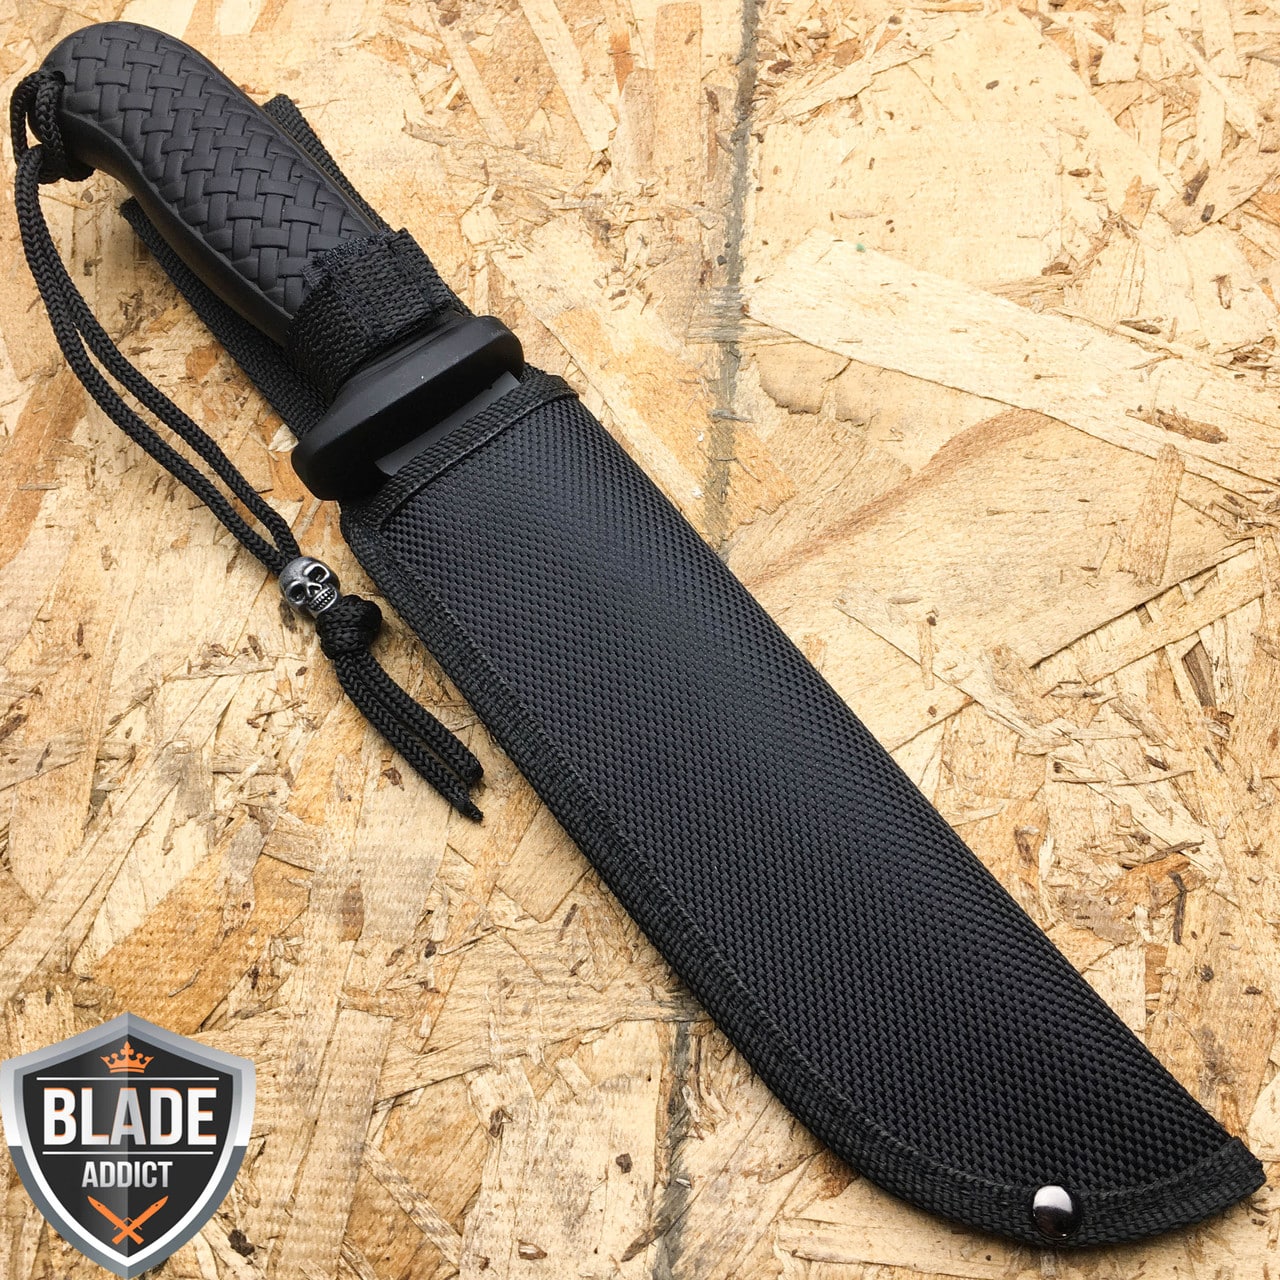 12" BLACK HUNTING SURVIVAL FIXED BLADE MACHETE TACTICAL Rambo Knife Sword SPEAR